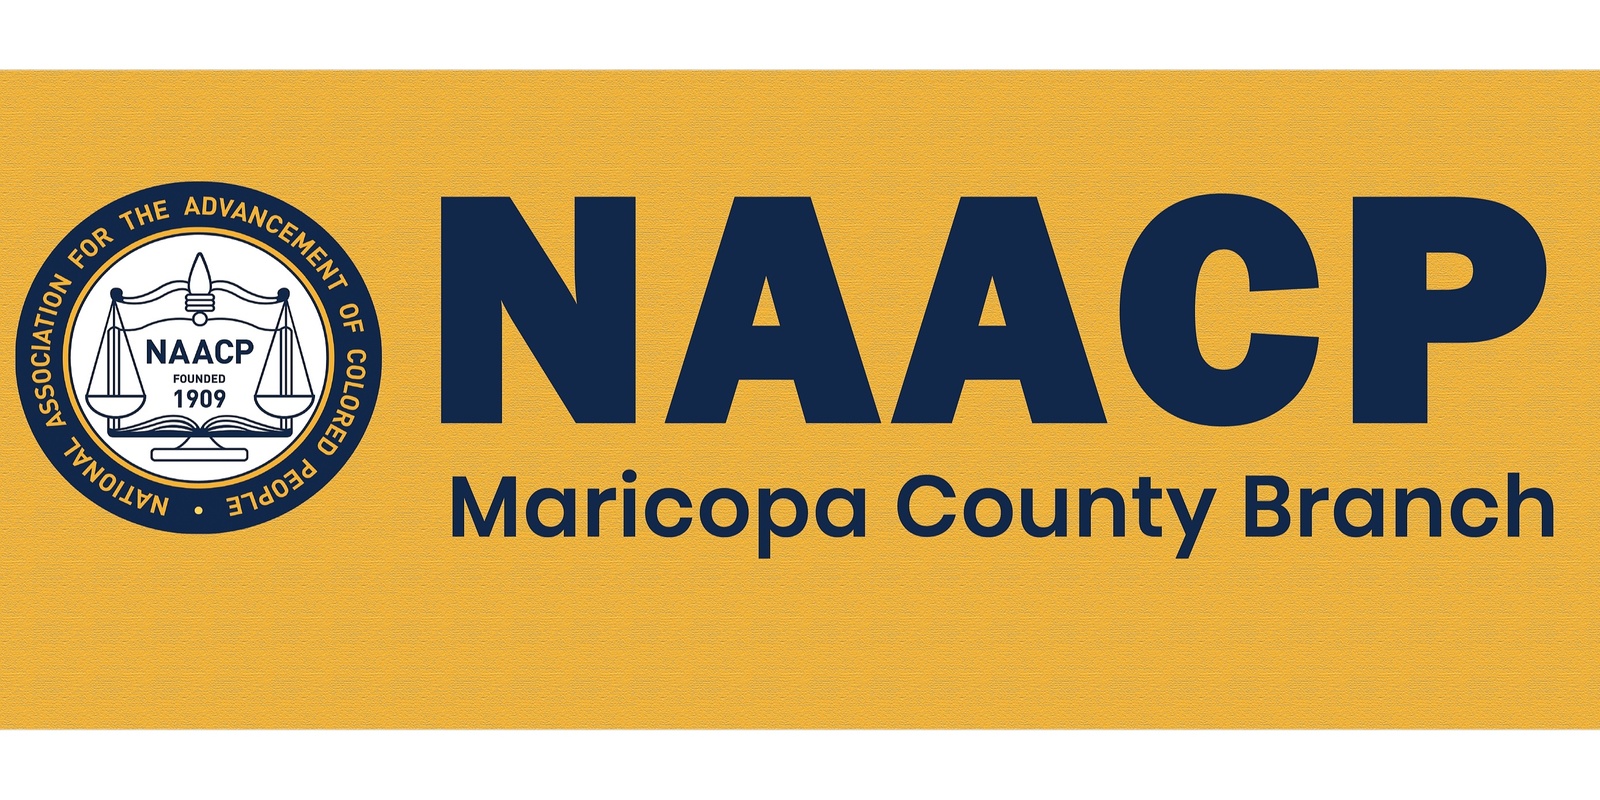 NAACP - Maricopa County Branch's banner